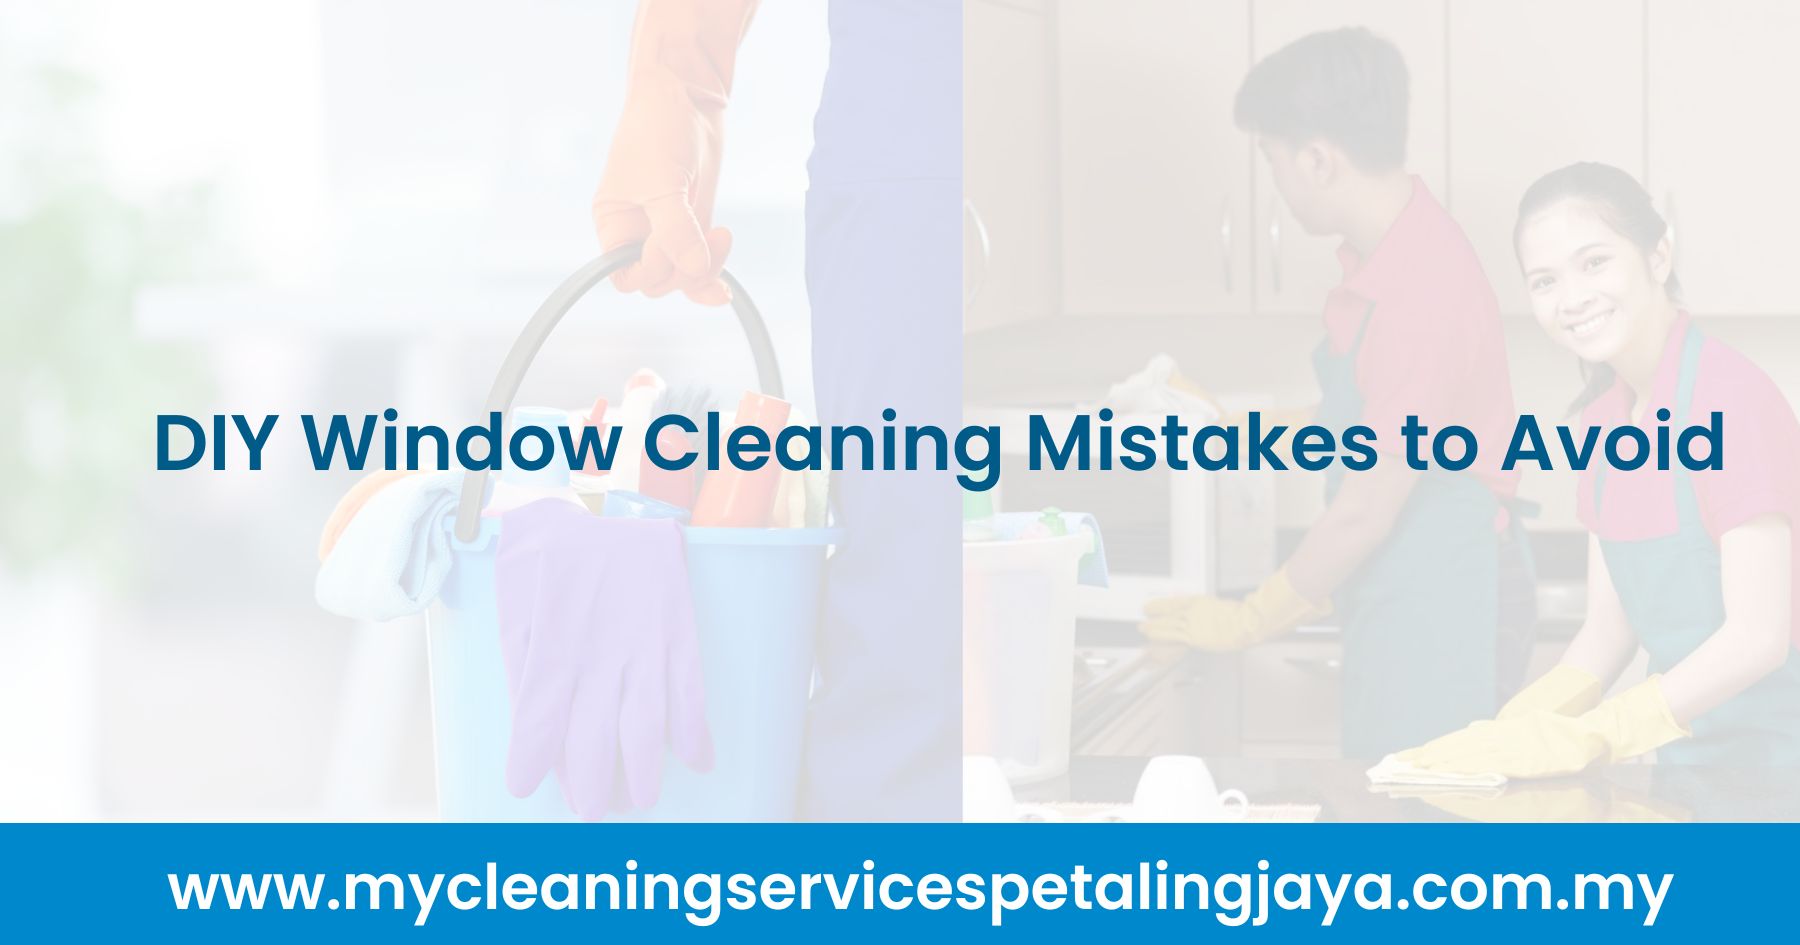 DIY Window Cleaning Mistakes to Avoid